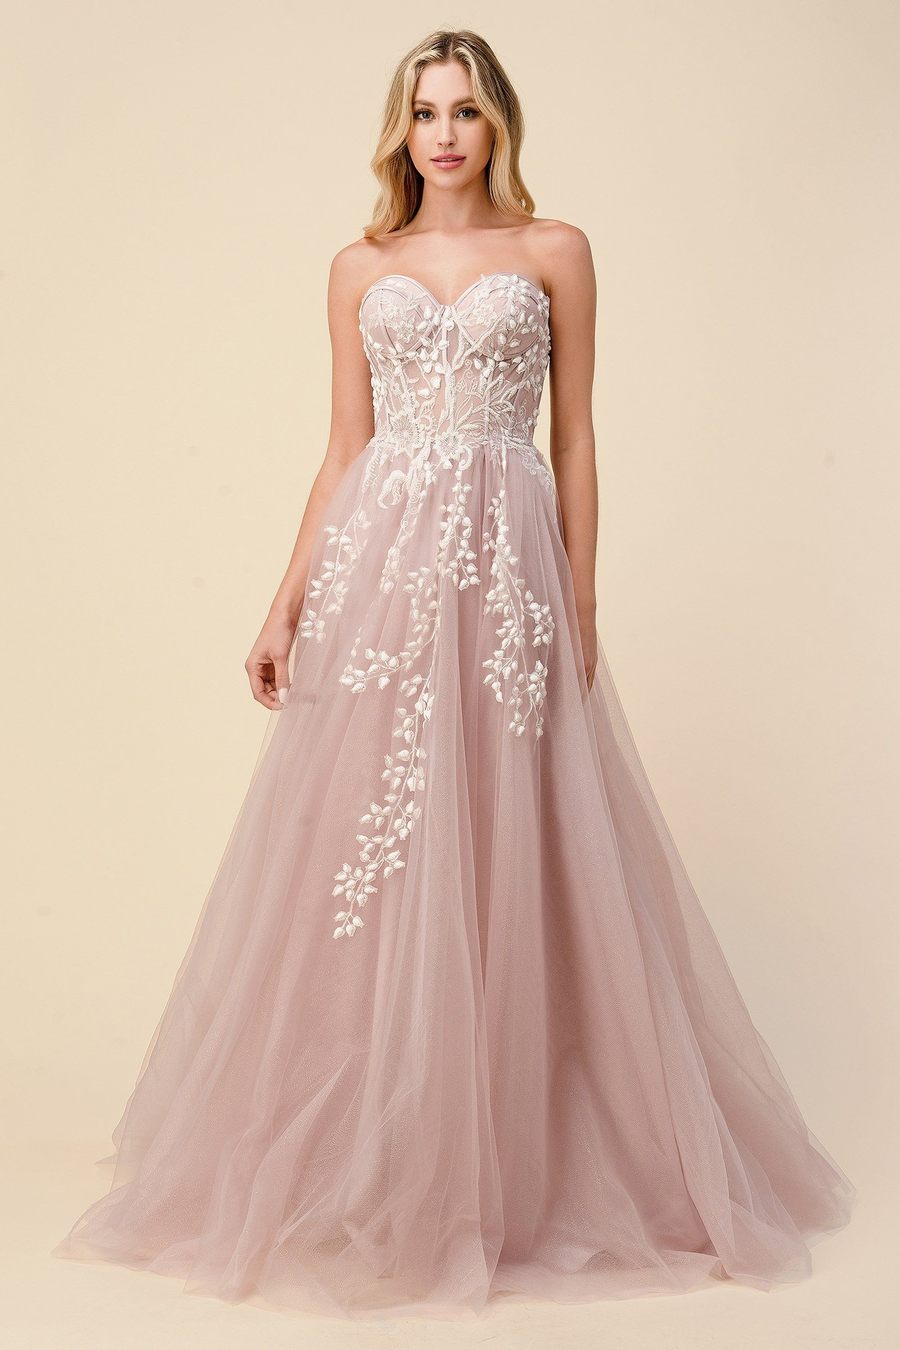 Andrea and Leo A1029 Strapless sweetheart tulle gown with embellished bodice and floral applique.